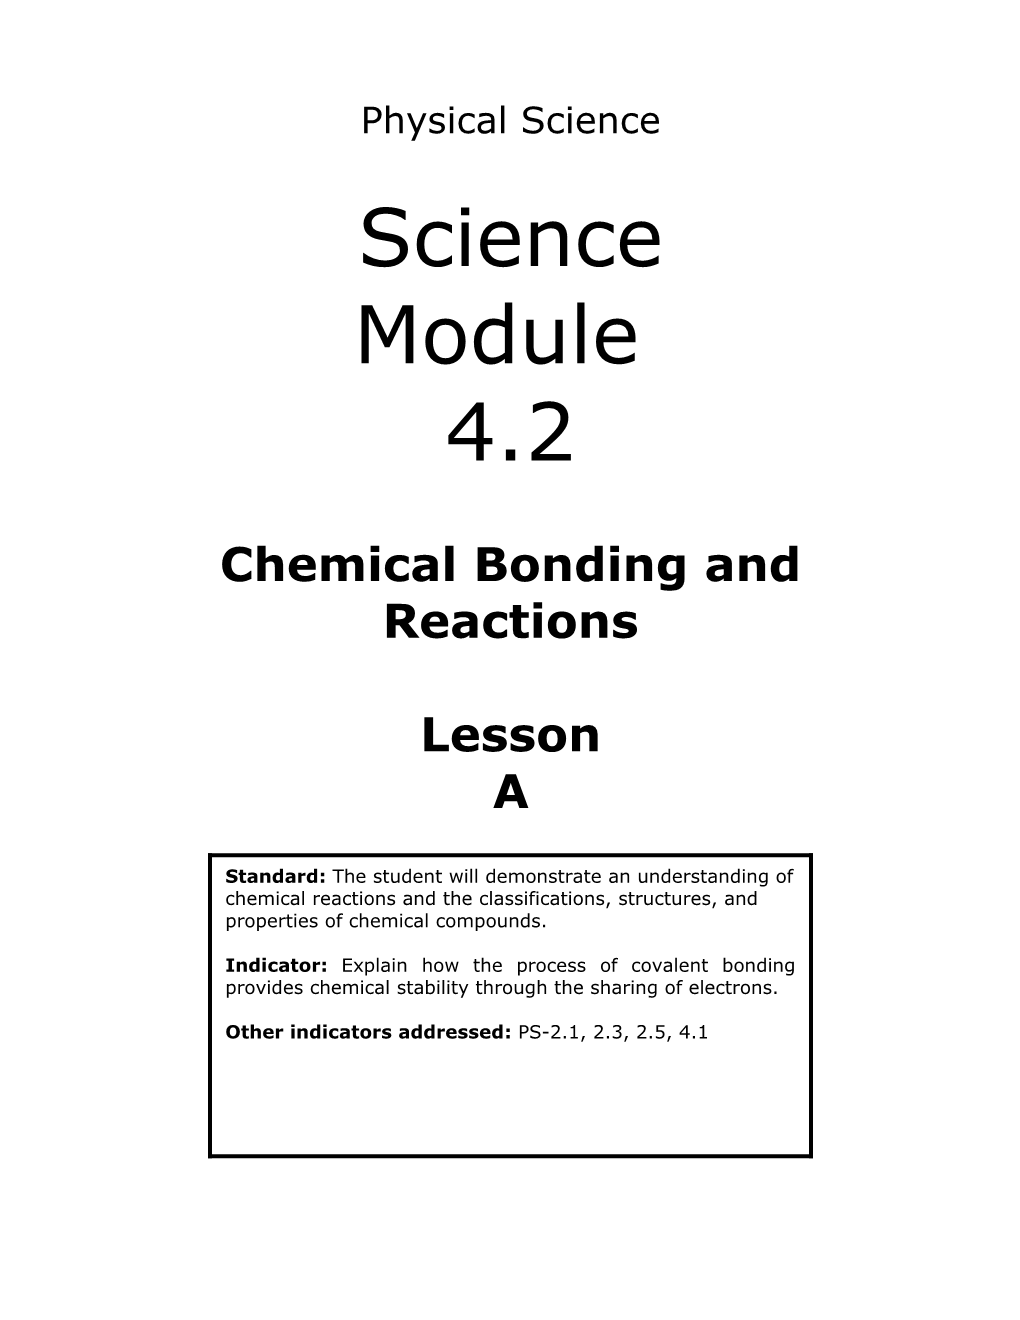 Chemical Bonding and Reactions